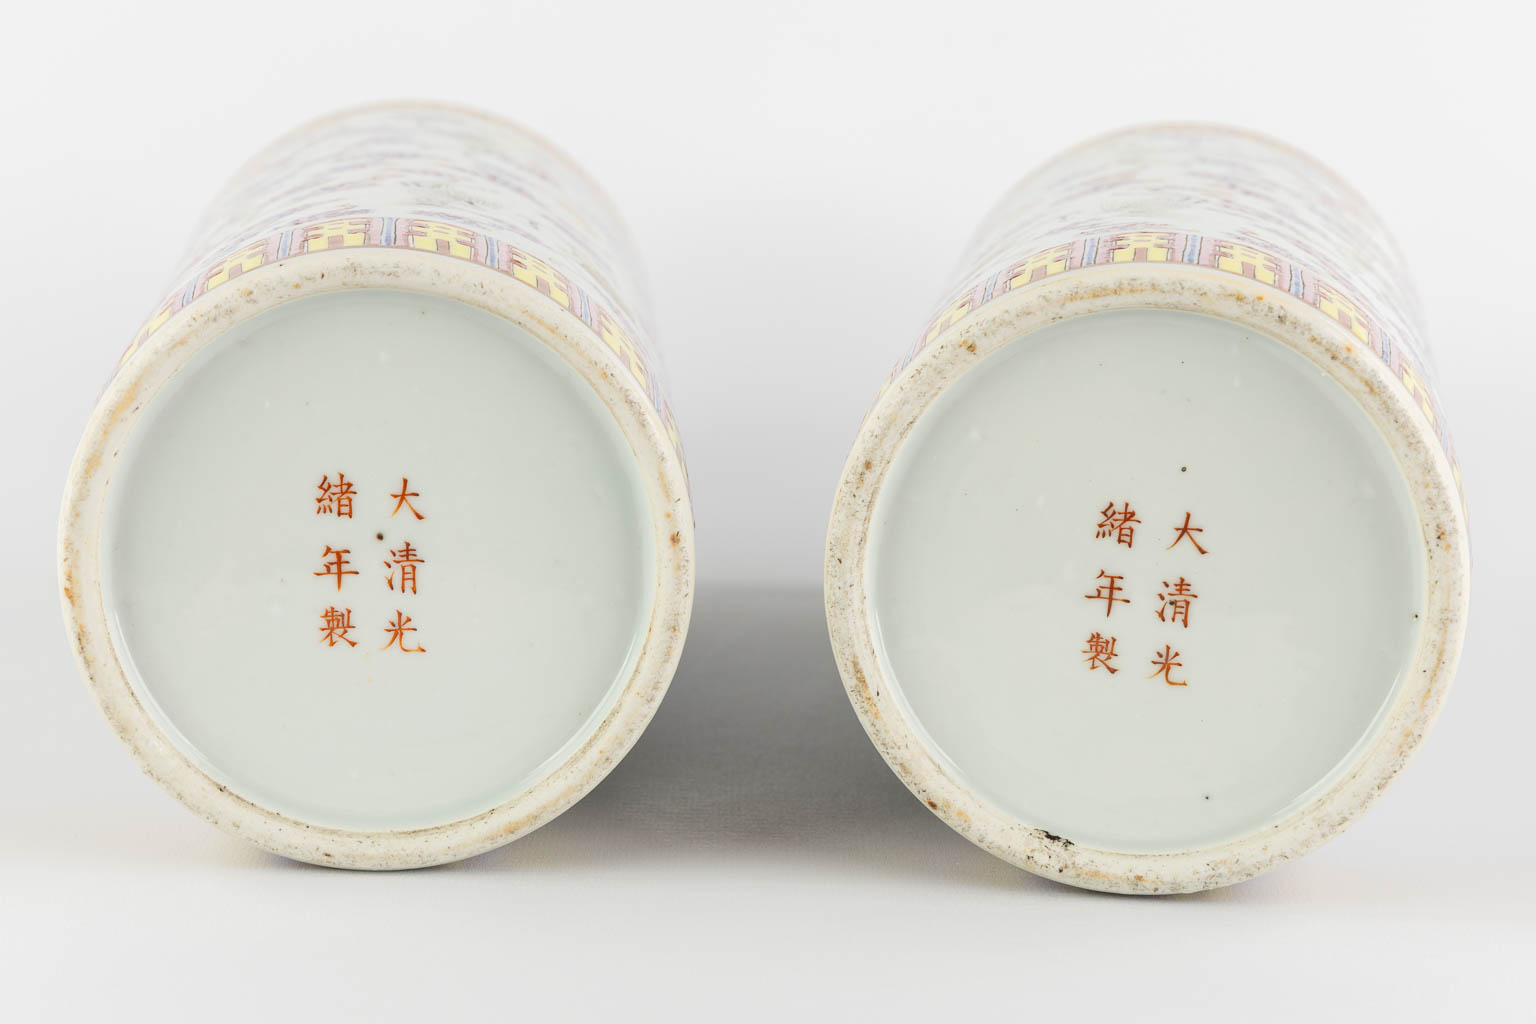 A fine pair of Chinese hat stands, Guangxu mark. (H:28 x D:12 cm)